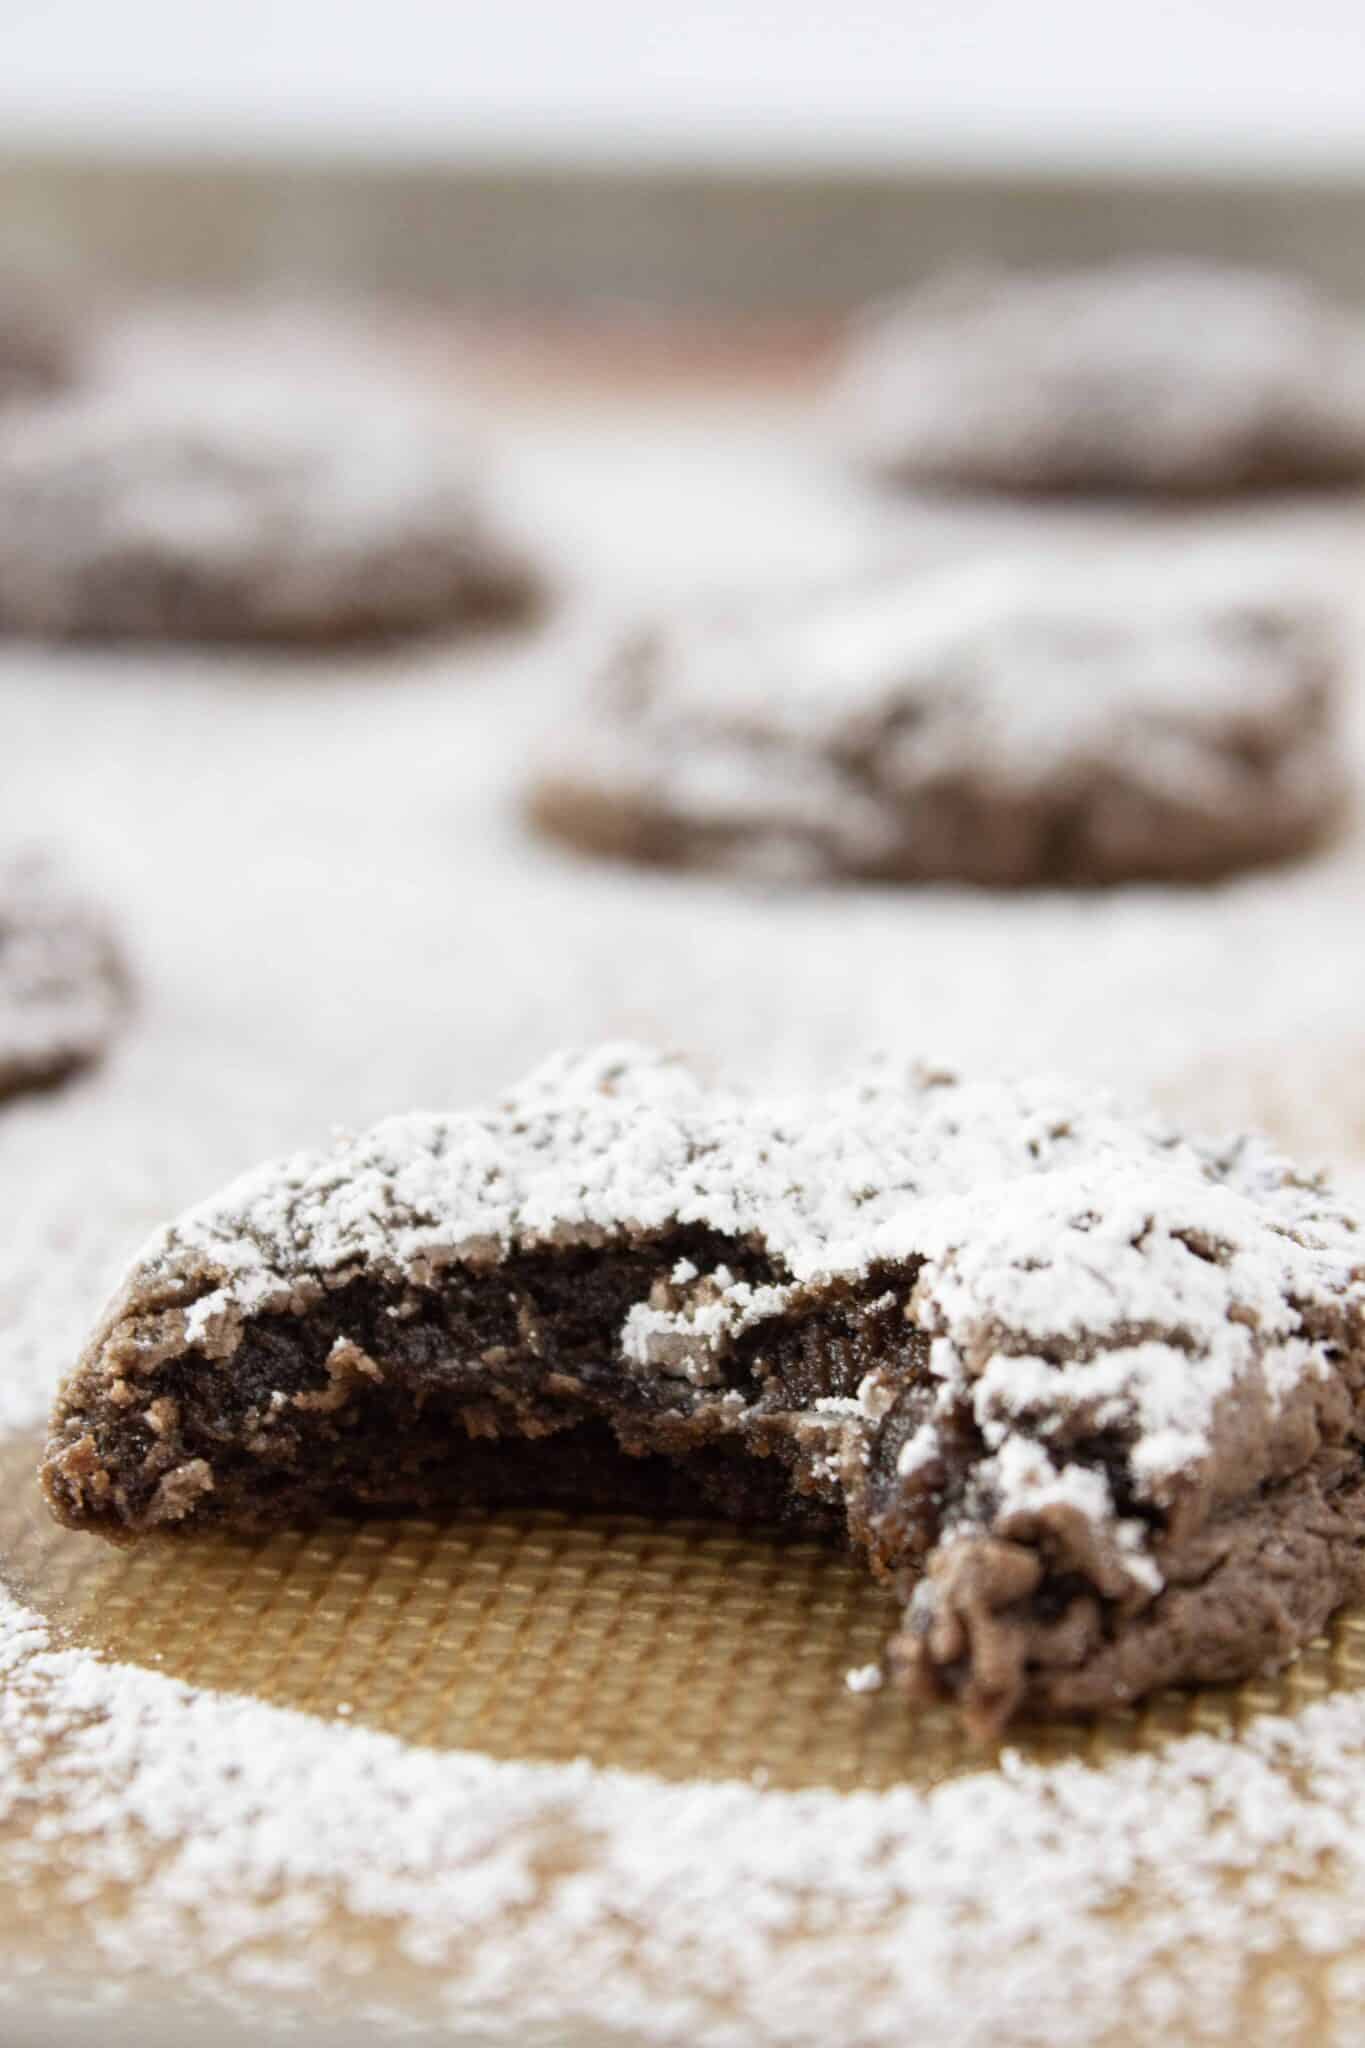 Cream Cheese Chocolate Cookies Recipe with a Cake Mix featured by top US cookie blogger, Practically Homemade